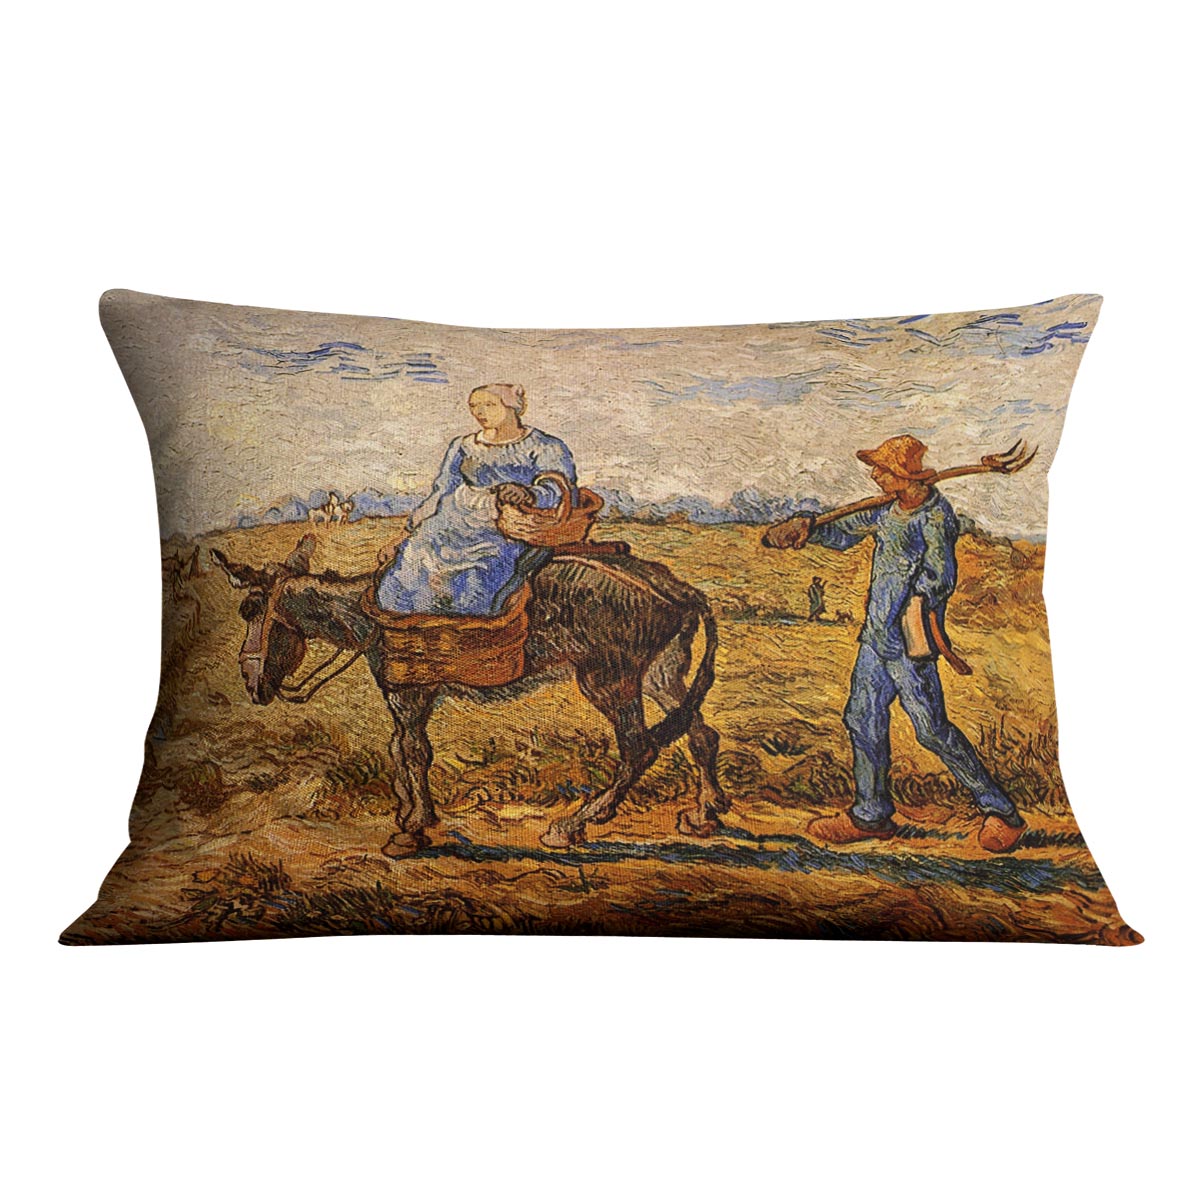 Morning Peasant Couple Going to Work by Van Gogh Cushion